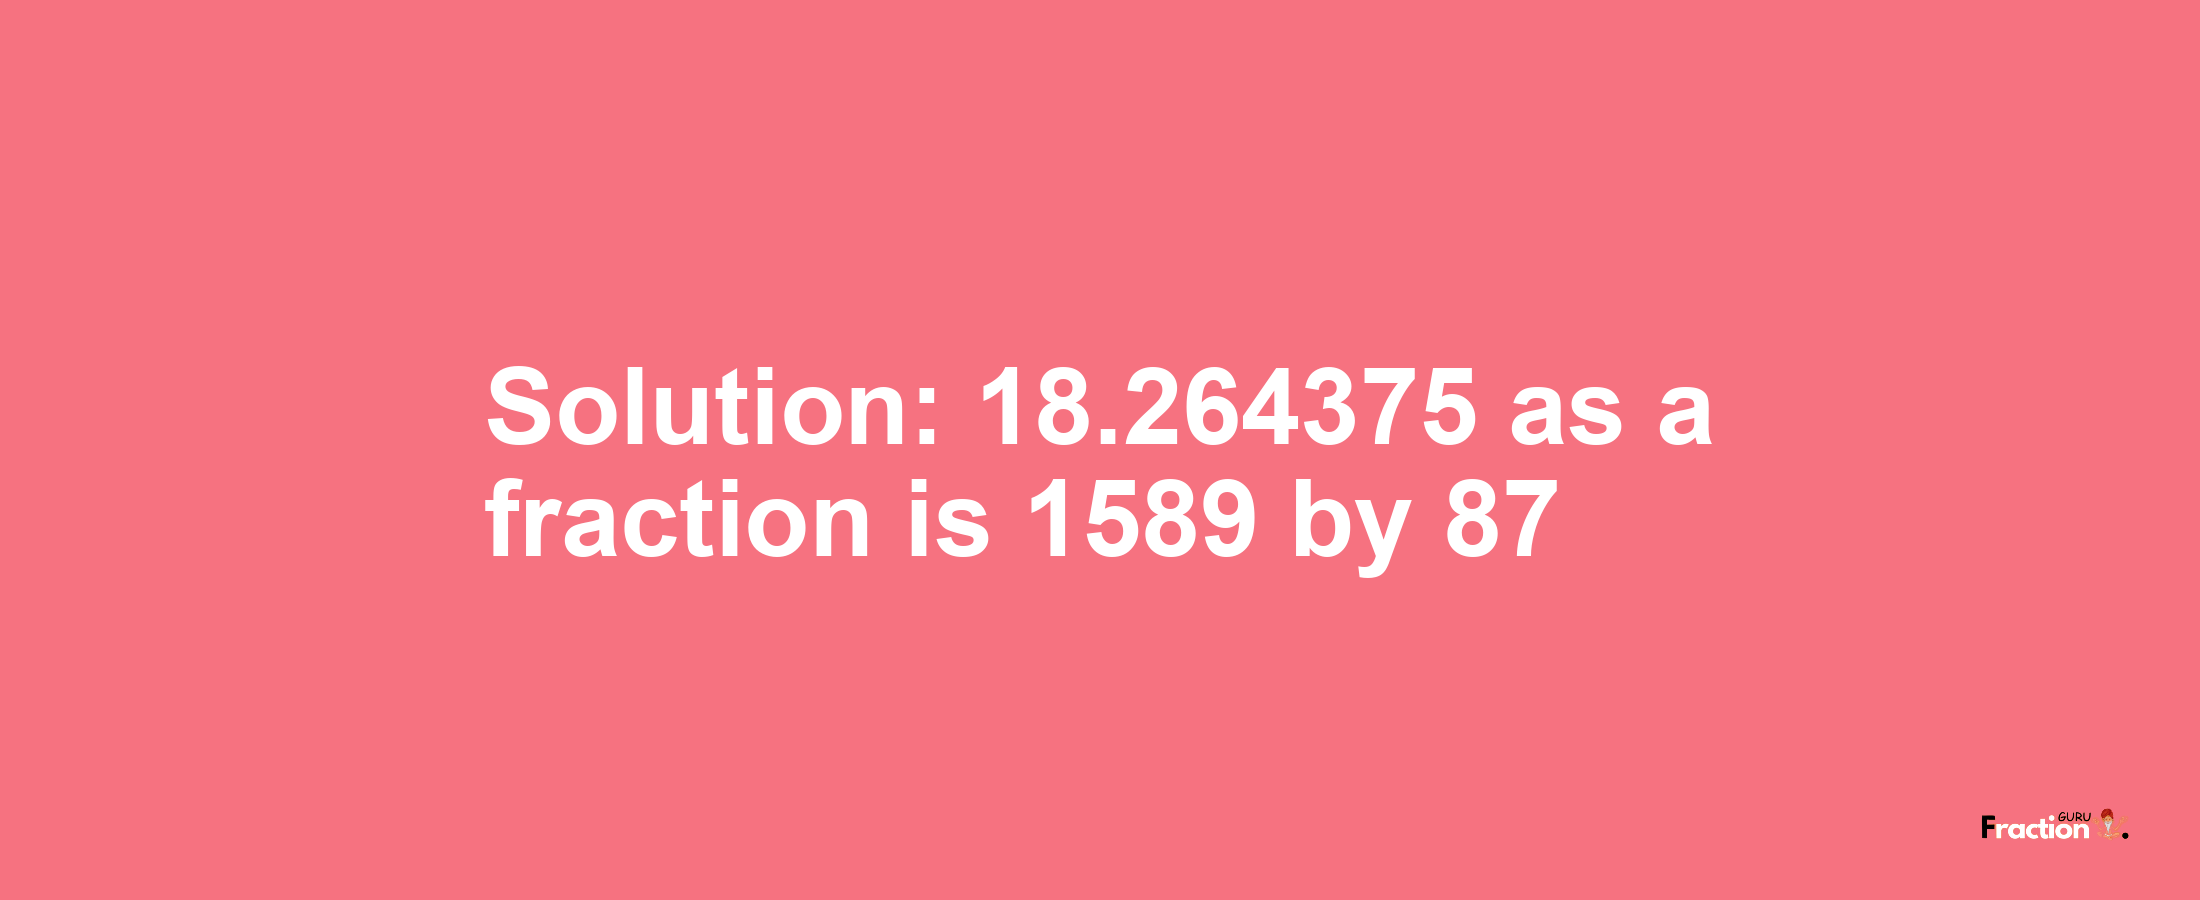 Solution:18.264375 as a fraction is 1589/87